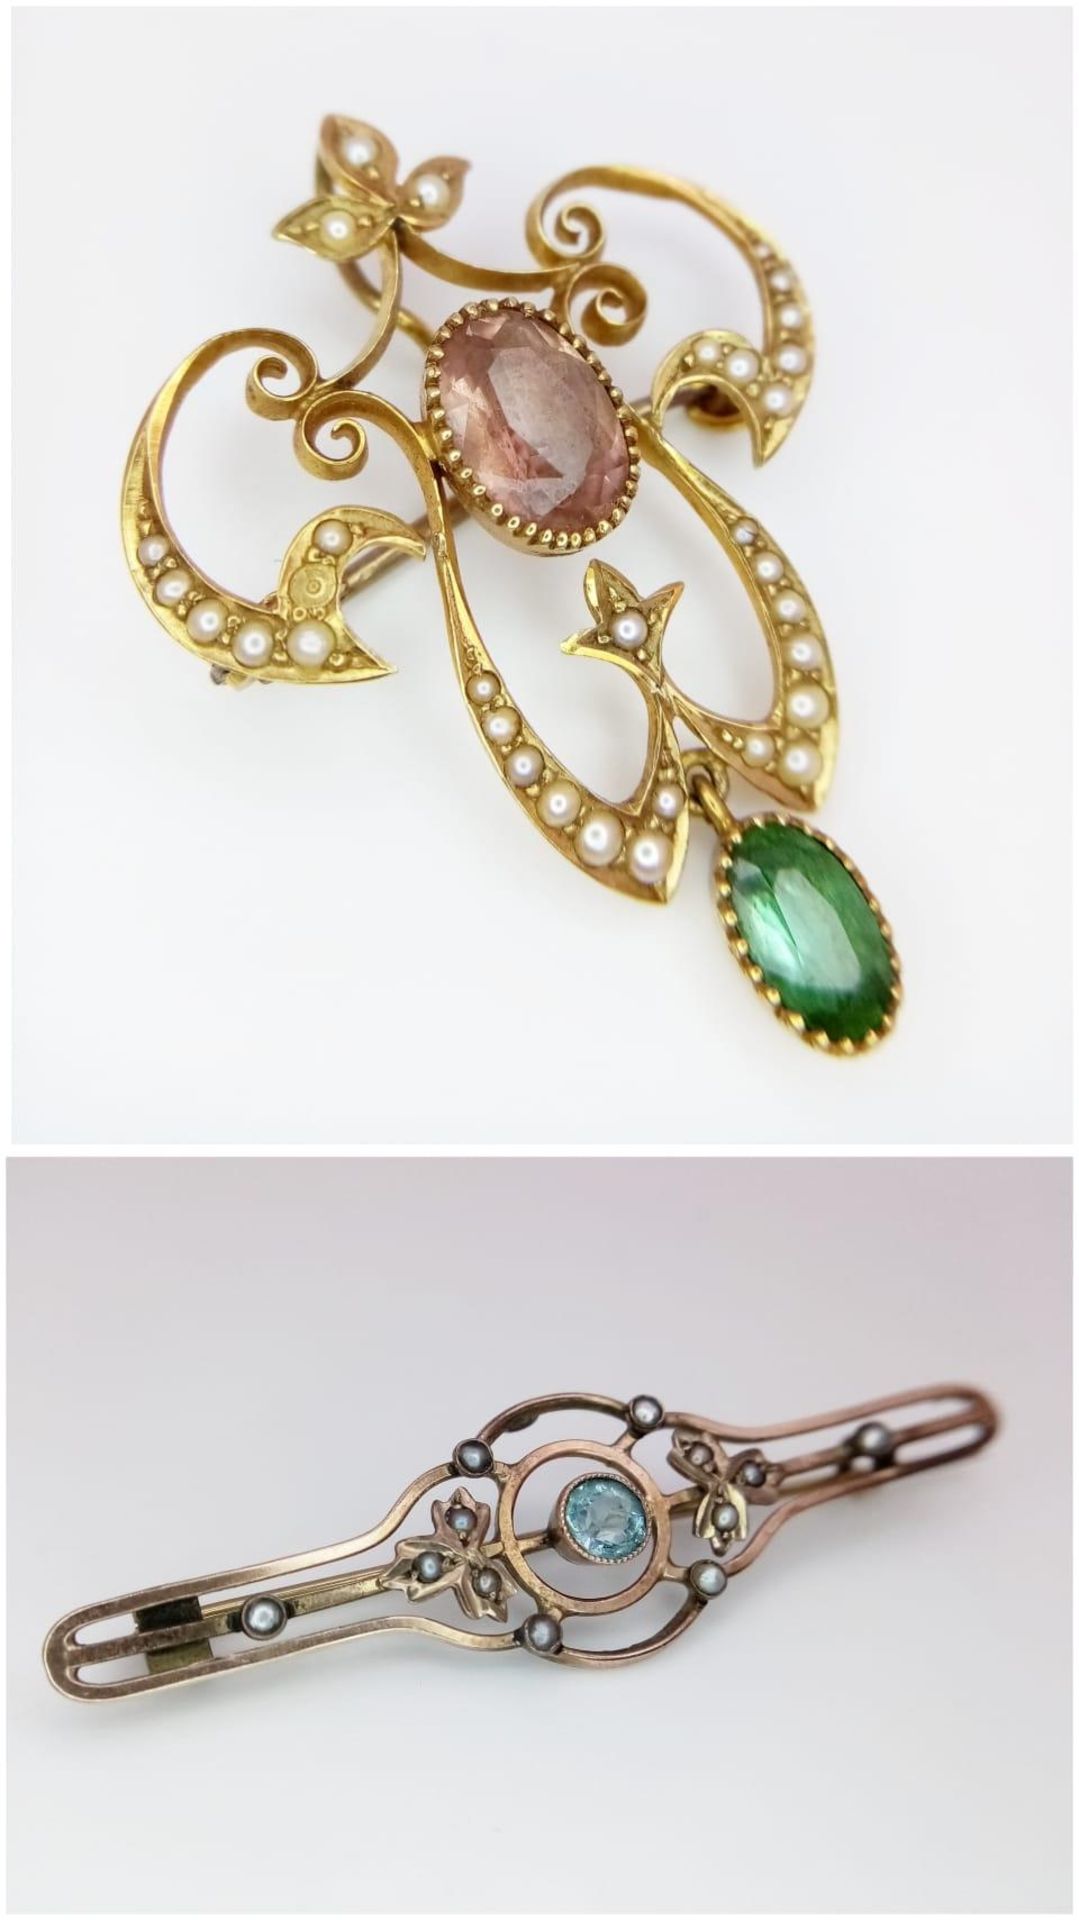 Two Victorian 10 K yellow gold brooches with seed pearls and a variety of stones. Lengths: 39 mm and